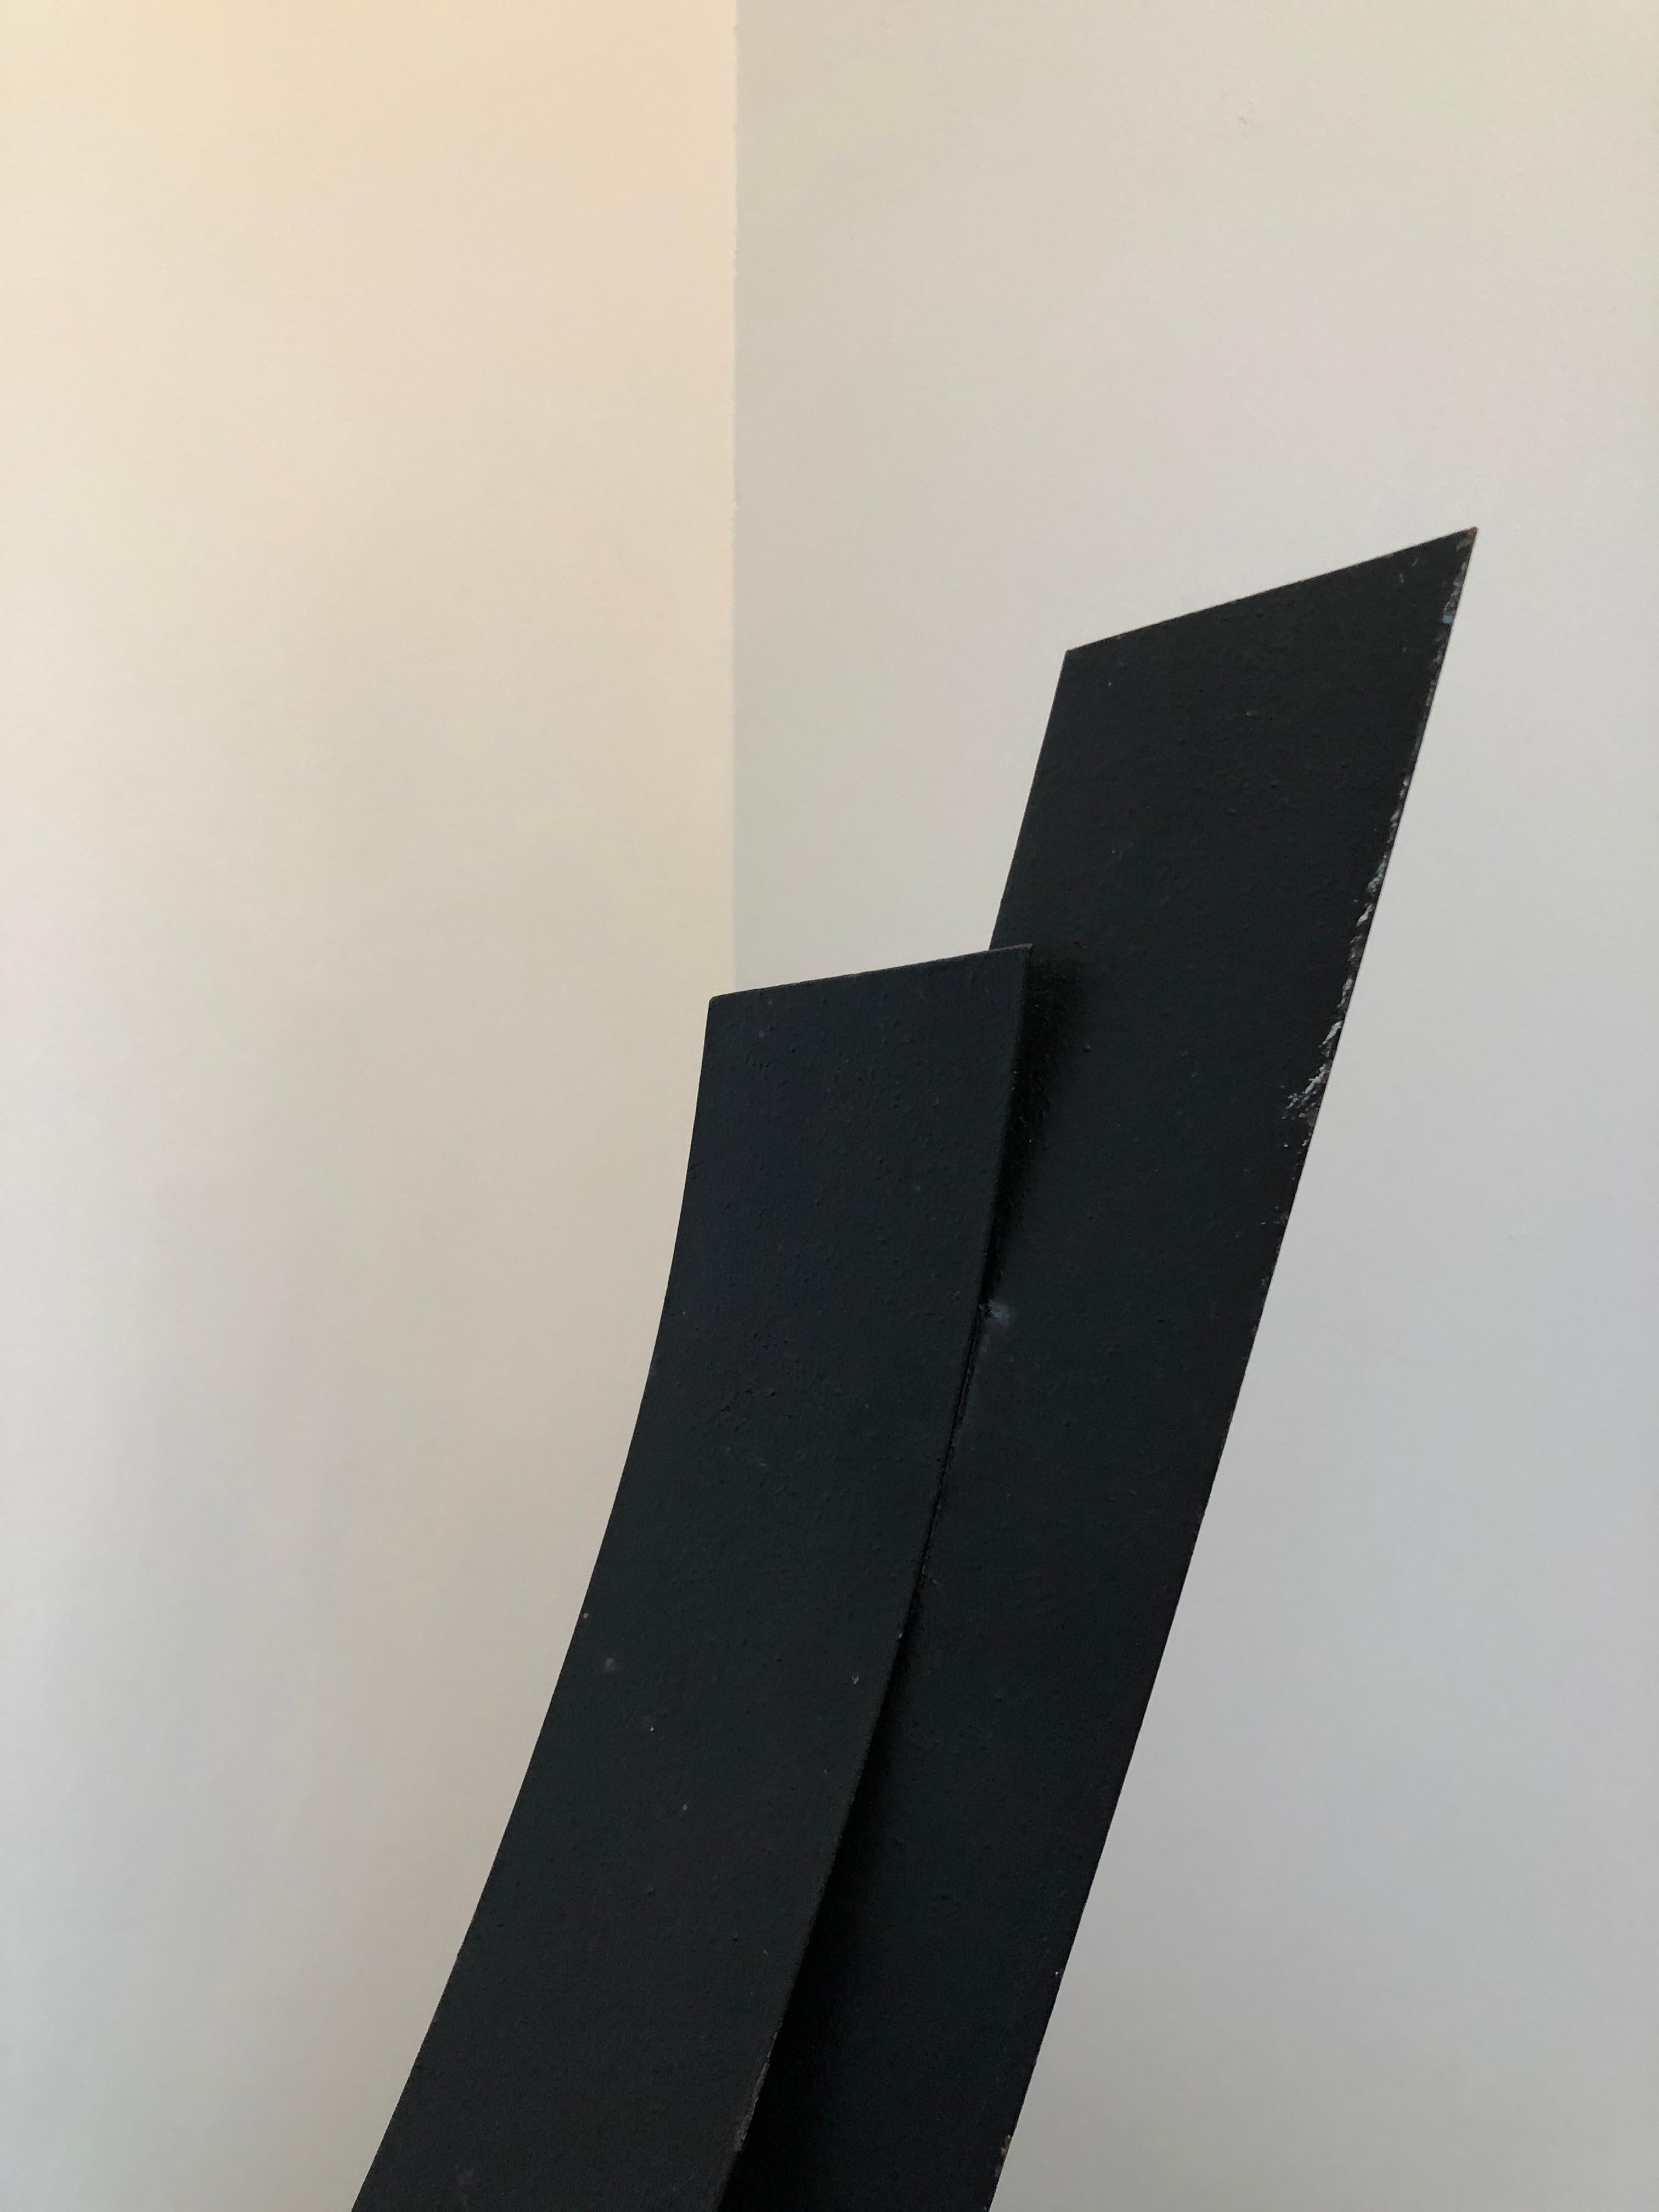 20th Century Abstract Sculpture in Black Textured Iron Metal by John Roper 11